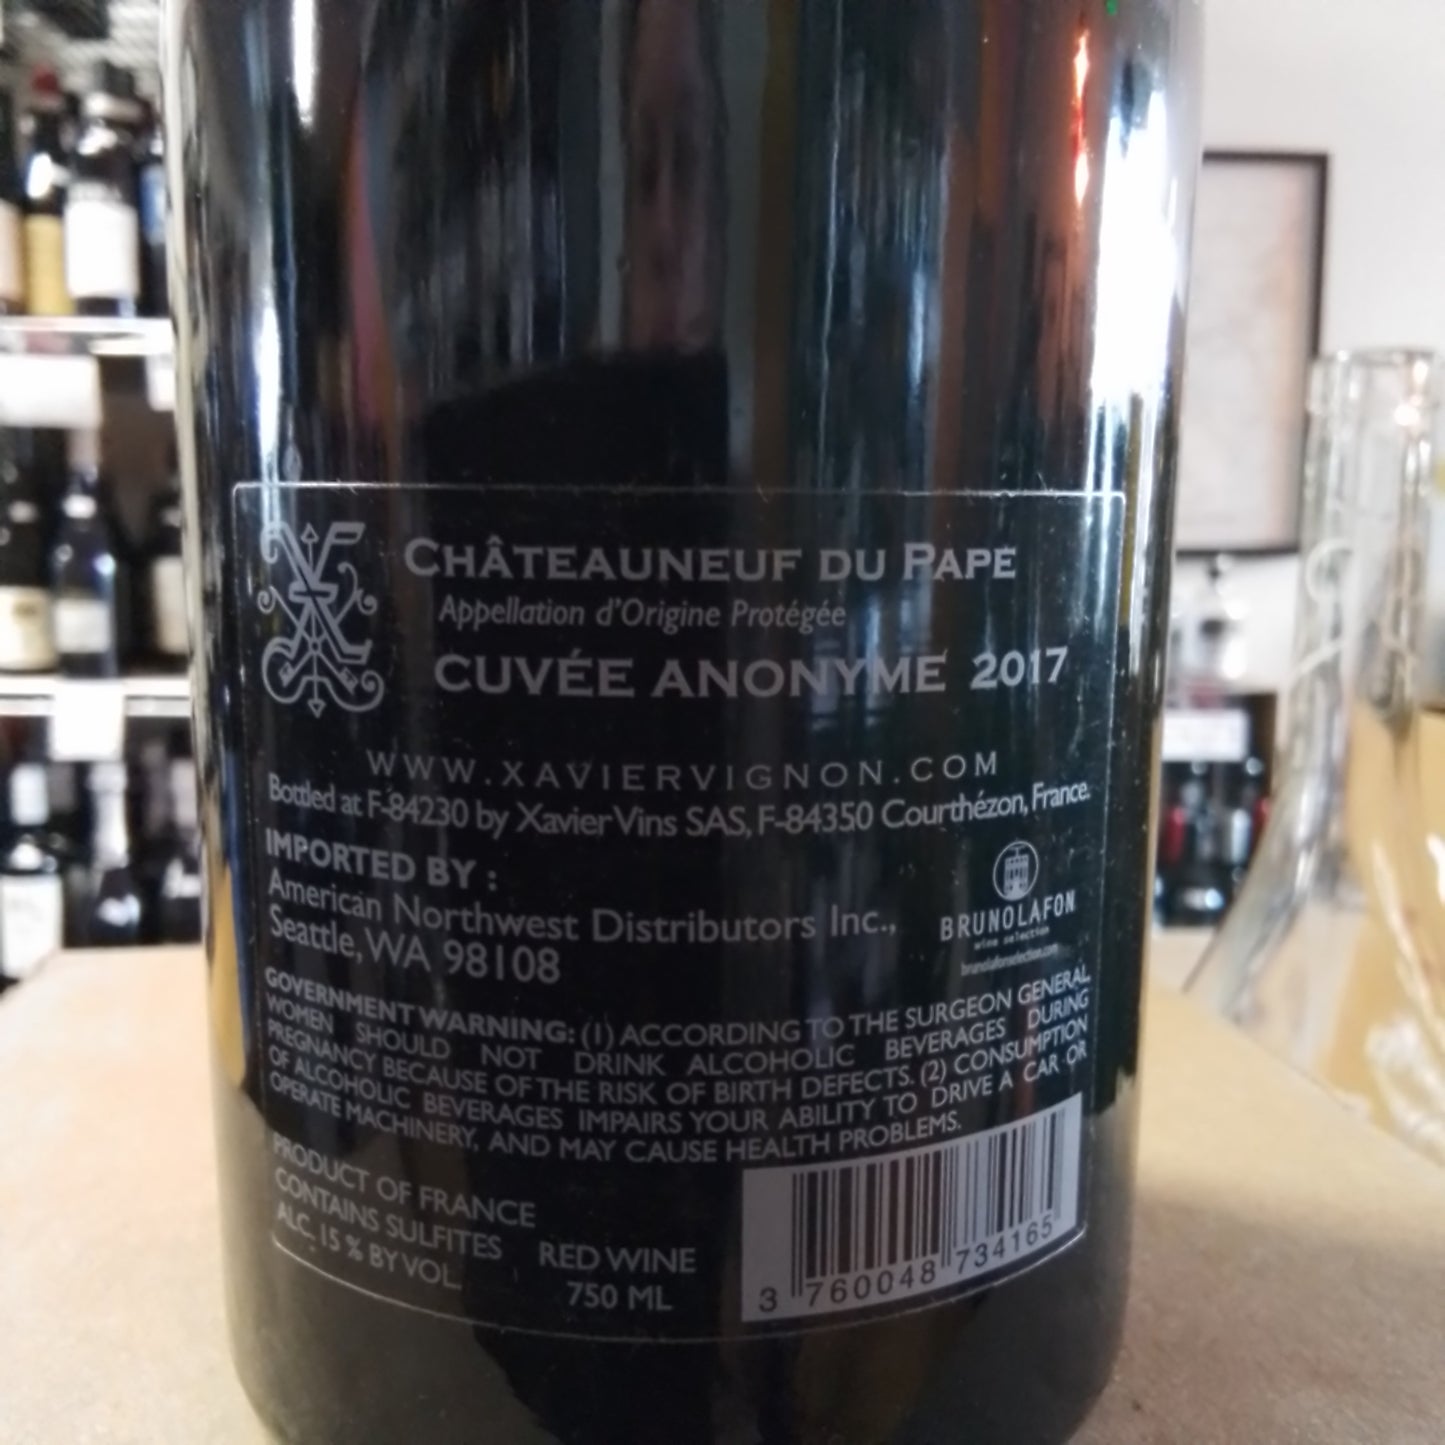 XAVIER VIGNON 2017 Chateauneuf-du-Pape Red Blend 'Cuvee Anonyme' (Rhone, France)